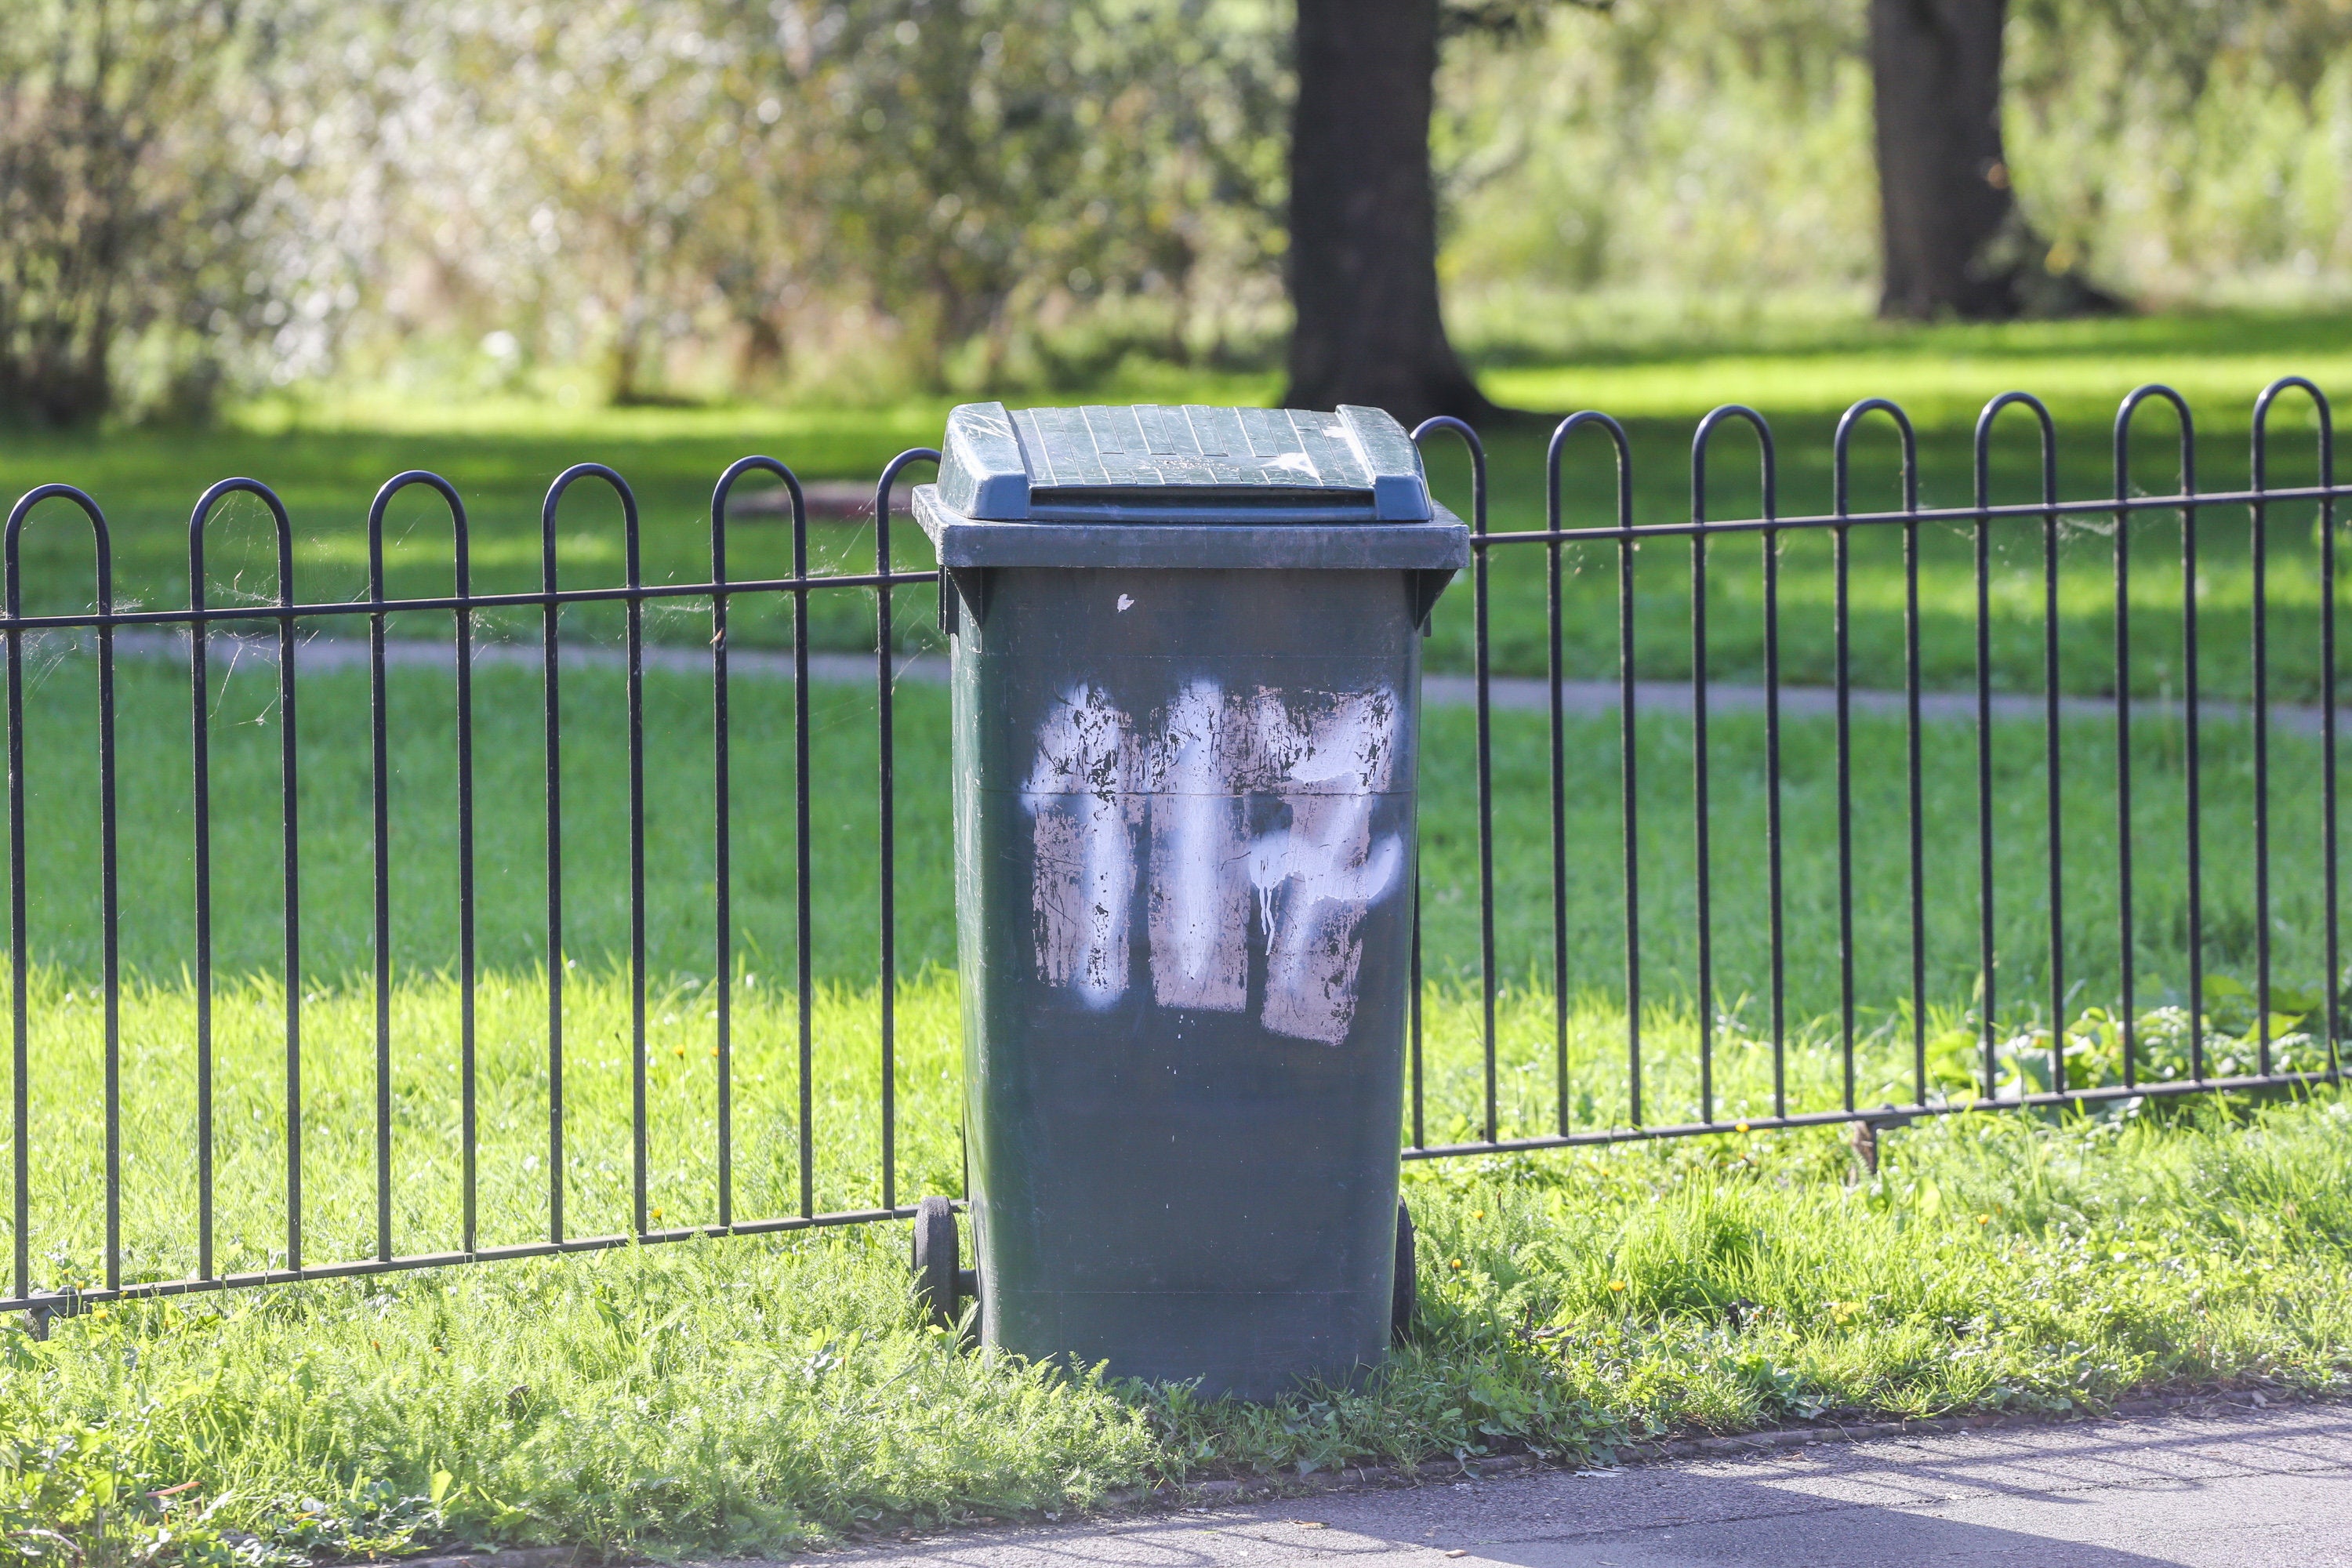 The bin which one resident reports the dog was put into